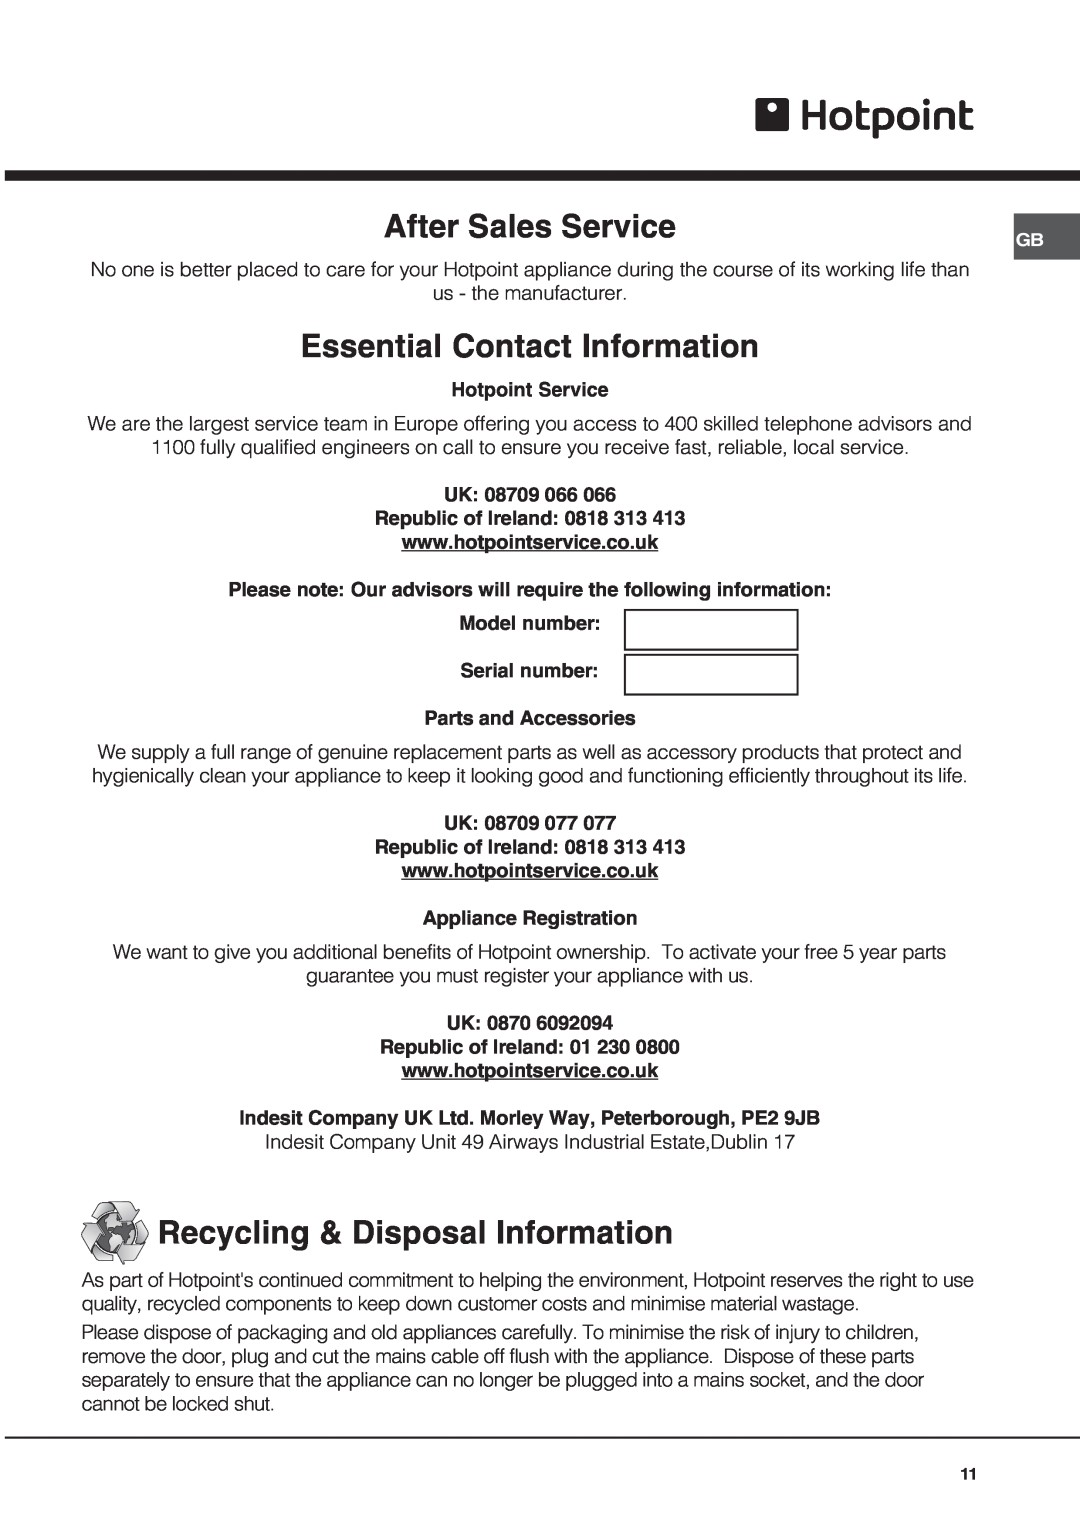 Hotpoint BS53X1 operating instructions After Sales Service, Essential Contact Information, Recycling & Disposal Information 